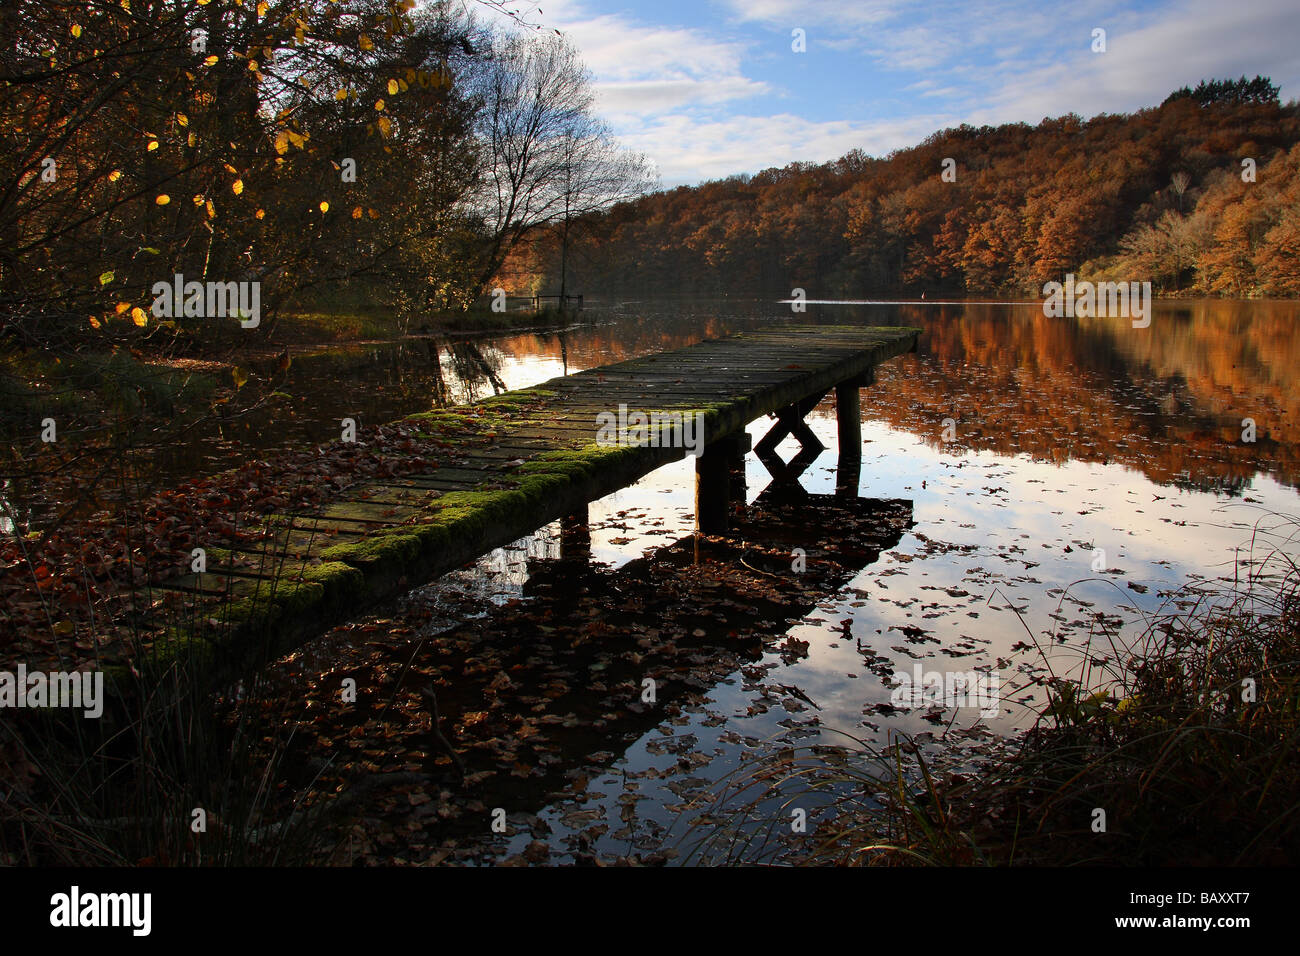 An old jetty on a river. Sunlit autumn trees on the far bank. Evening sky reflected in the water. Stock Photo